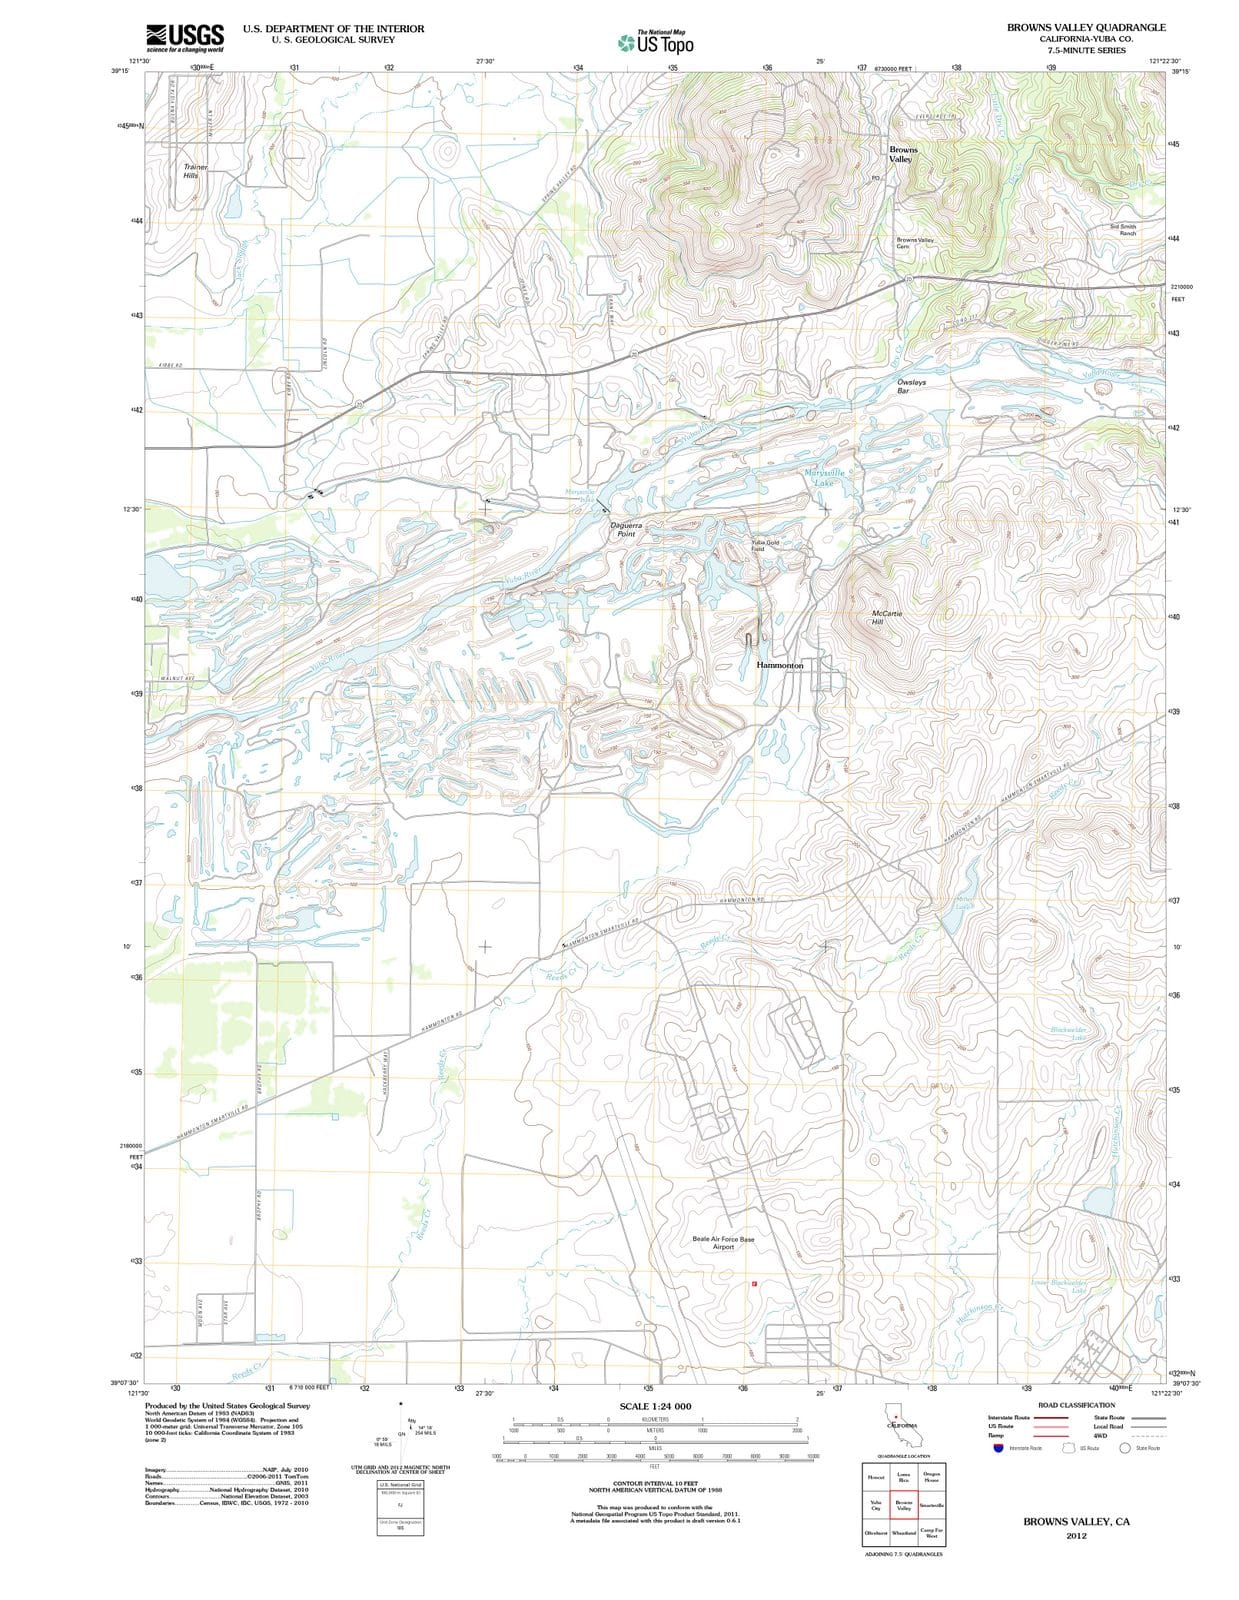 2012 Browns Valley, CA - California - USGS Topographic Map